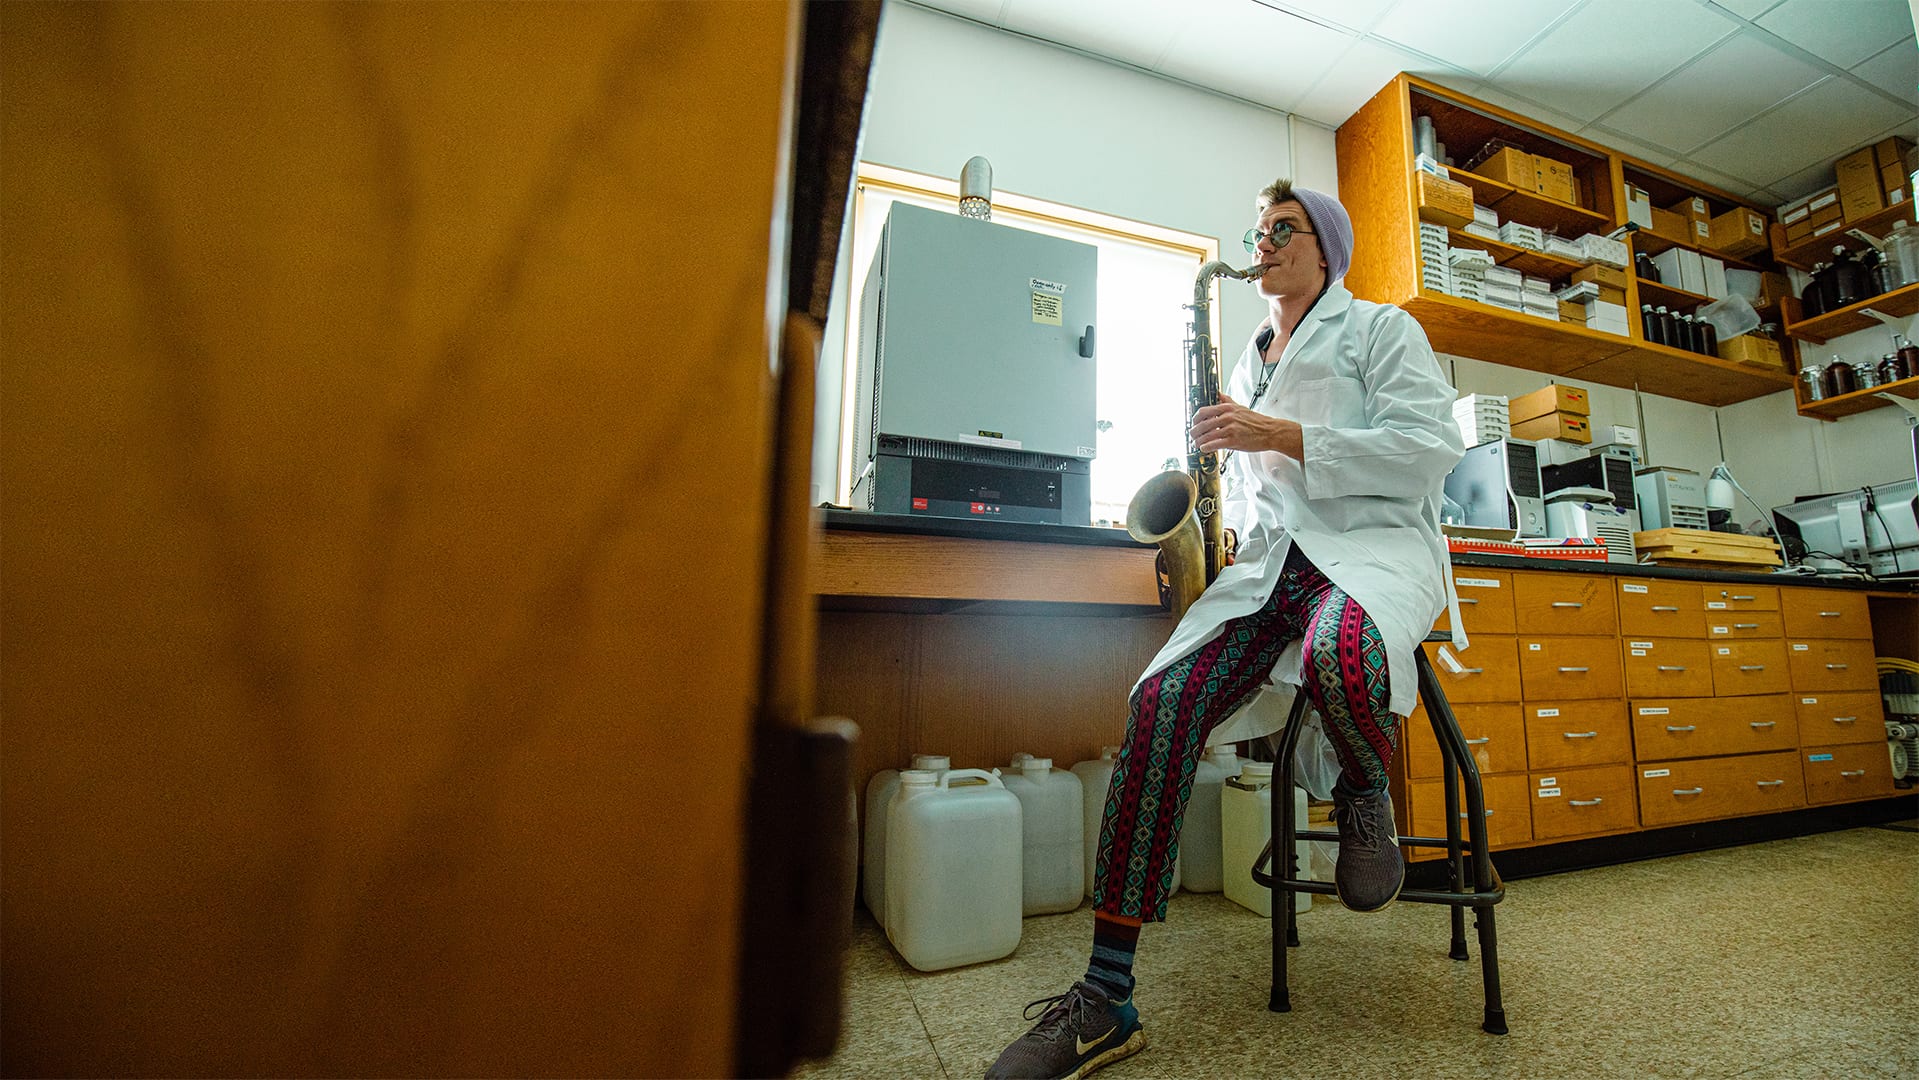 Noah Germolus plays a jazzy tune in between running mass spectrophotometers at WHOI's Molecular Environmental Science Lab. (Daniel Hentz, © Woods Hole Oceanographic Institution) 